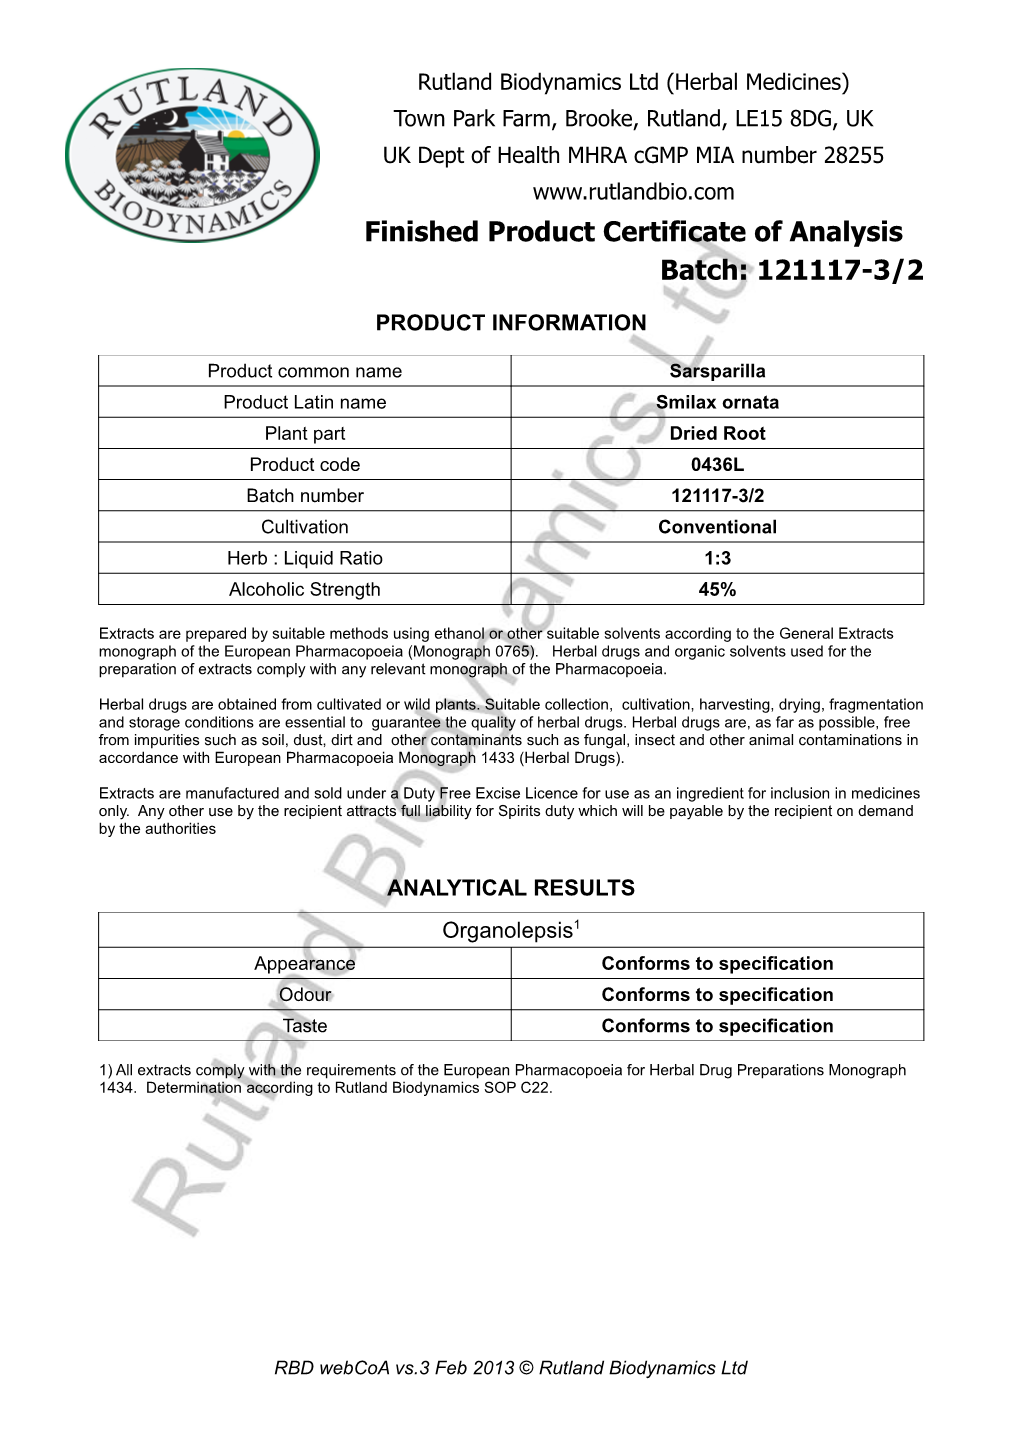 Batch: 121117-3/2 Finished Product Certificate of Analysis